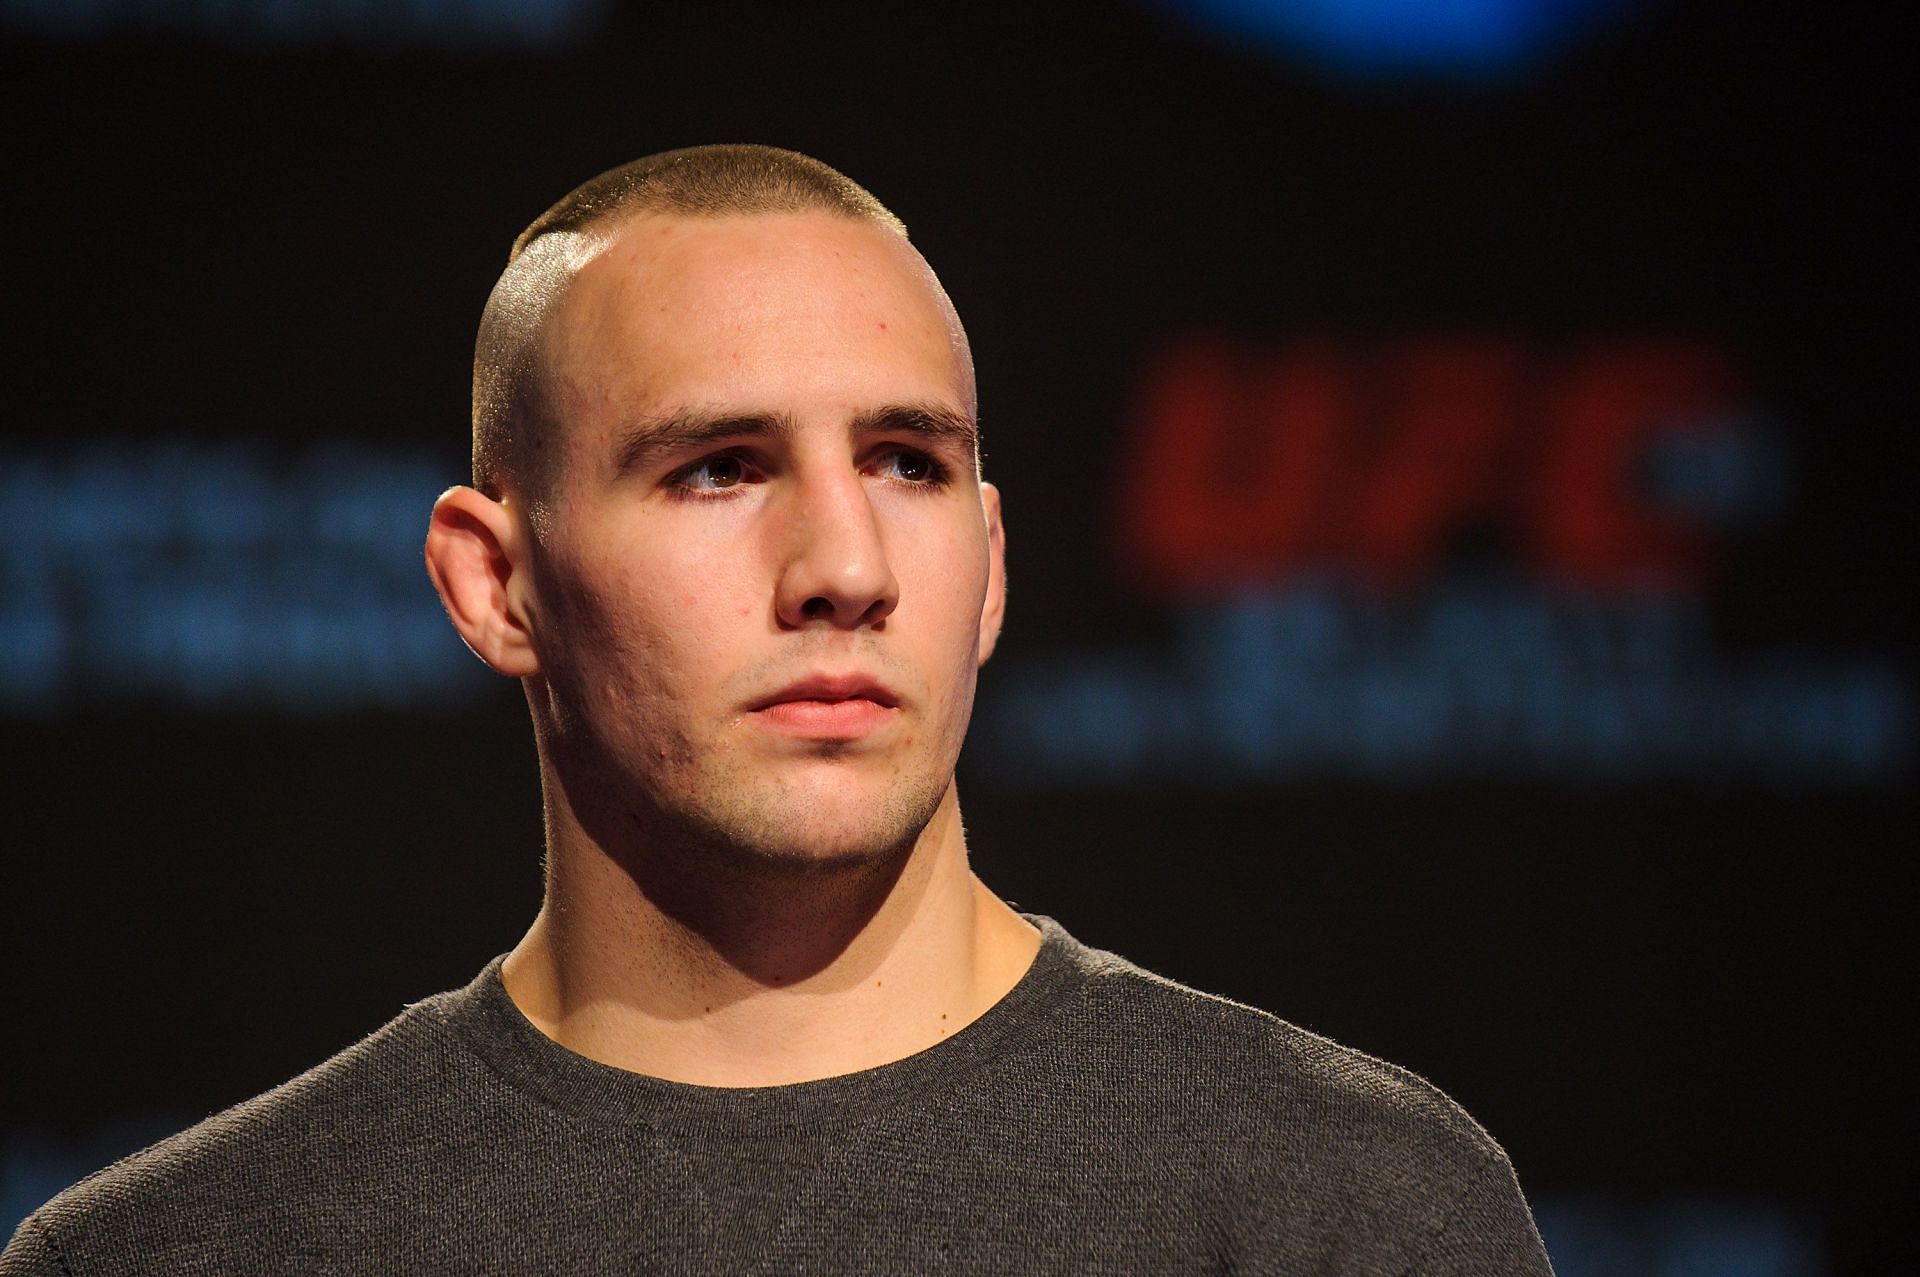 Rory MacDonald was never the same after his crazy war with Robbie Lawler